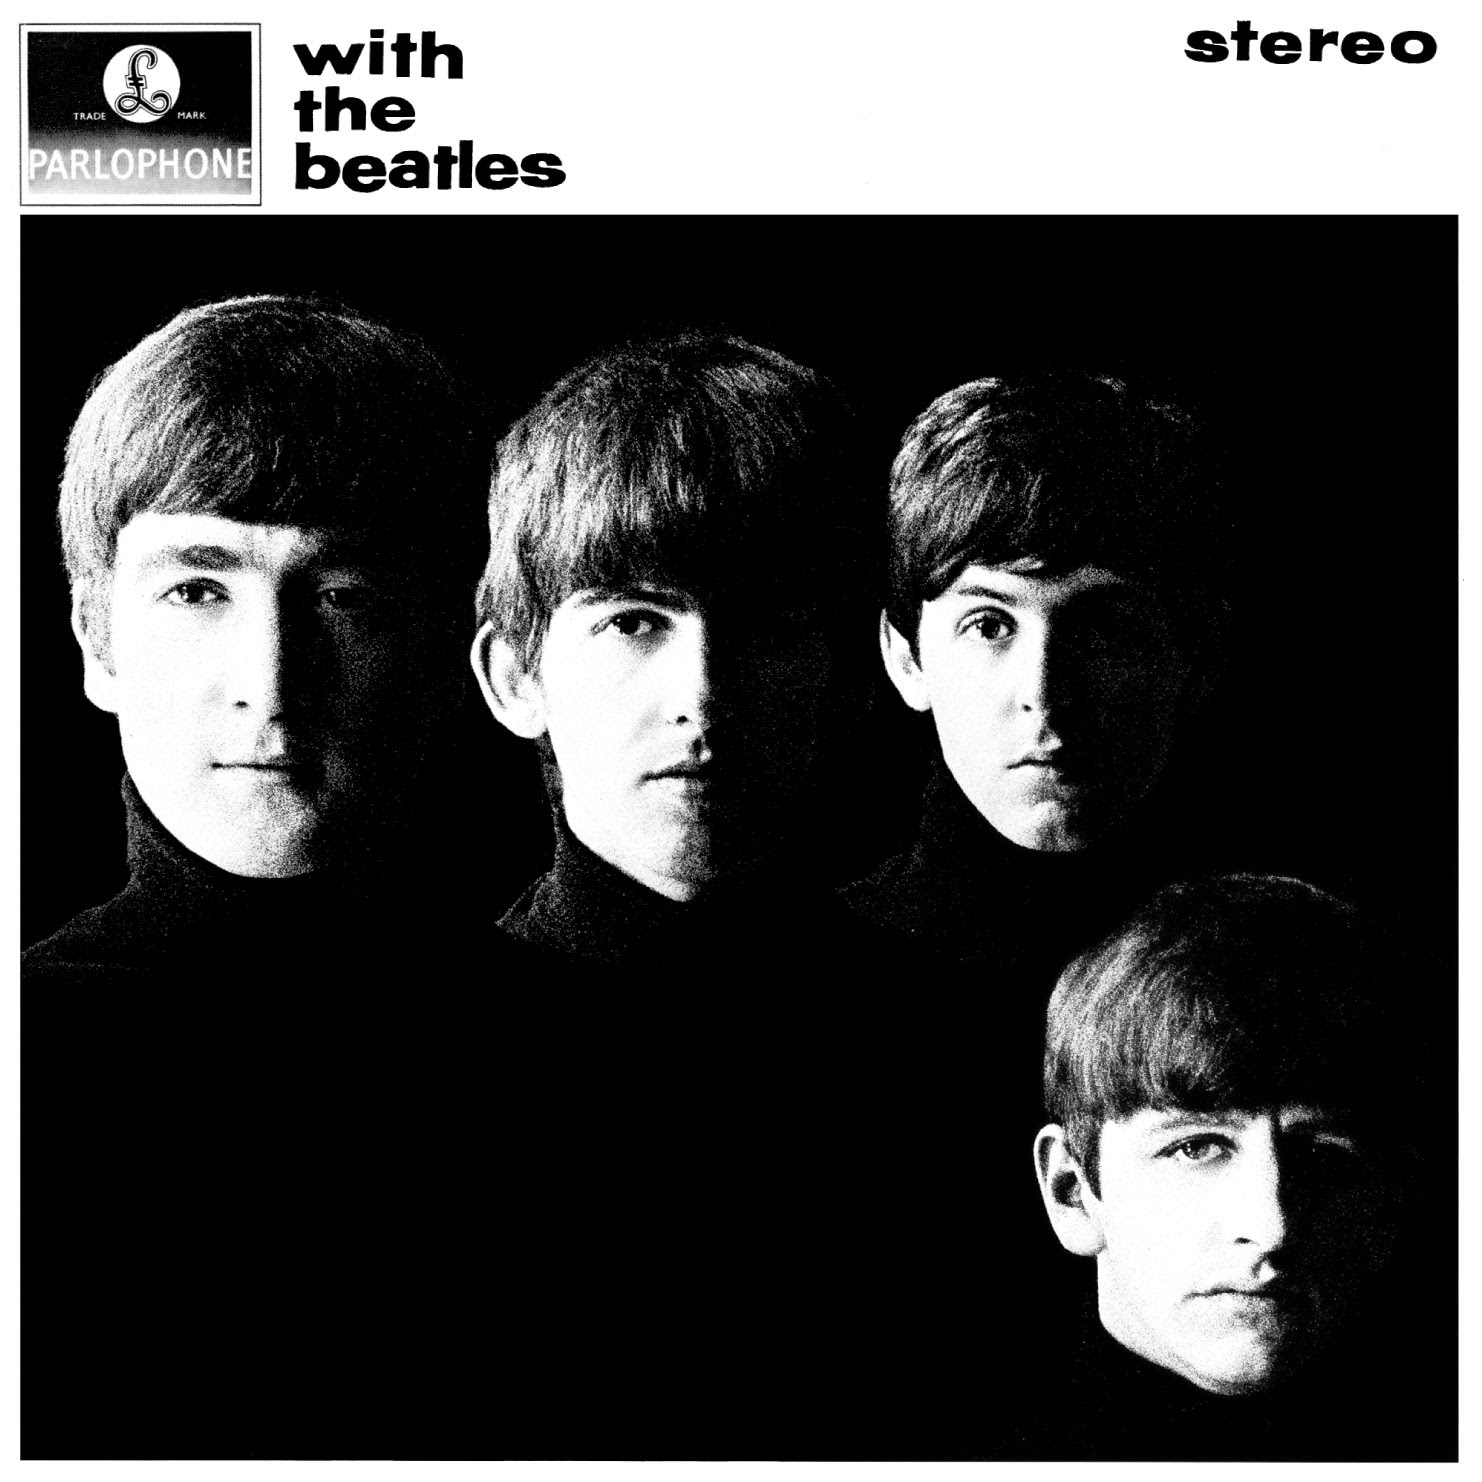 Albums 95+ Images album or cover the beatles with the beatles Stunning